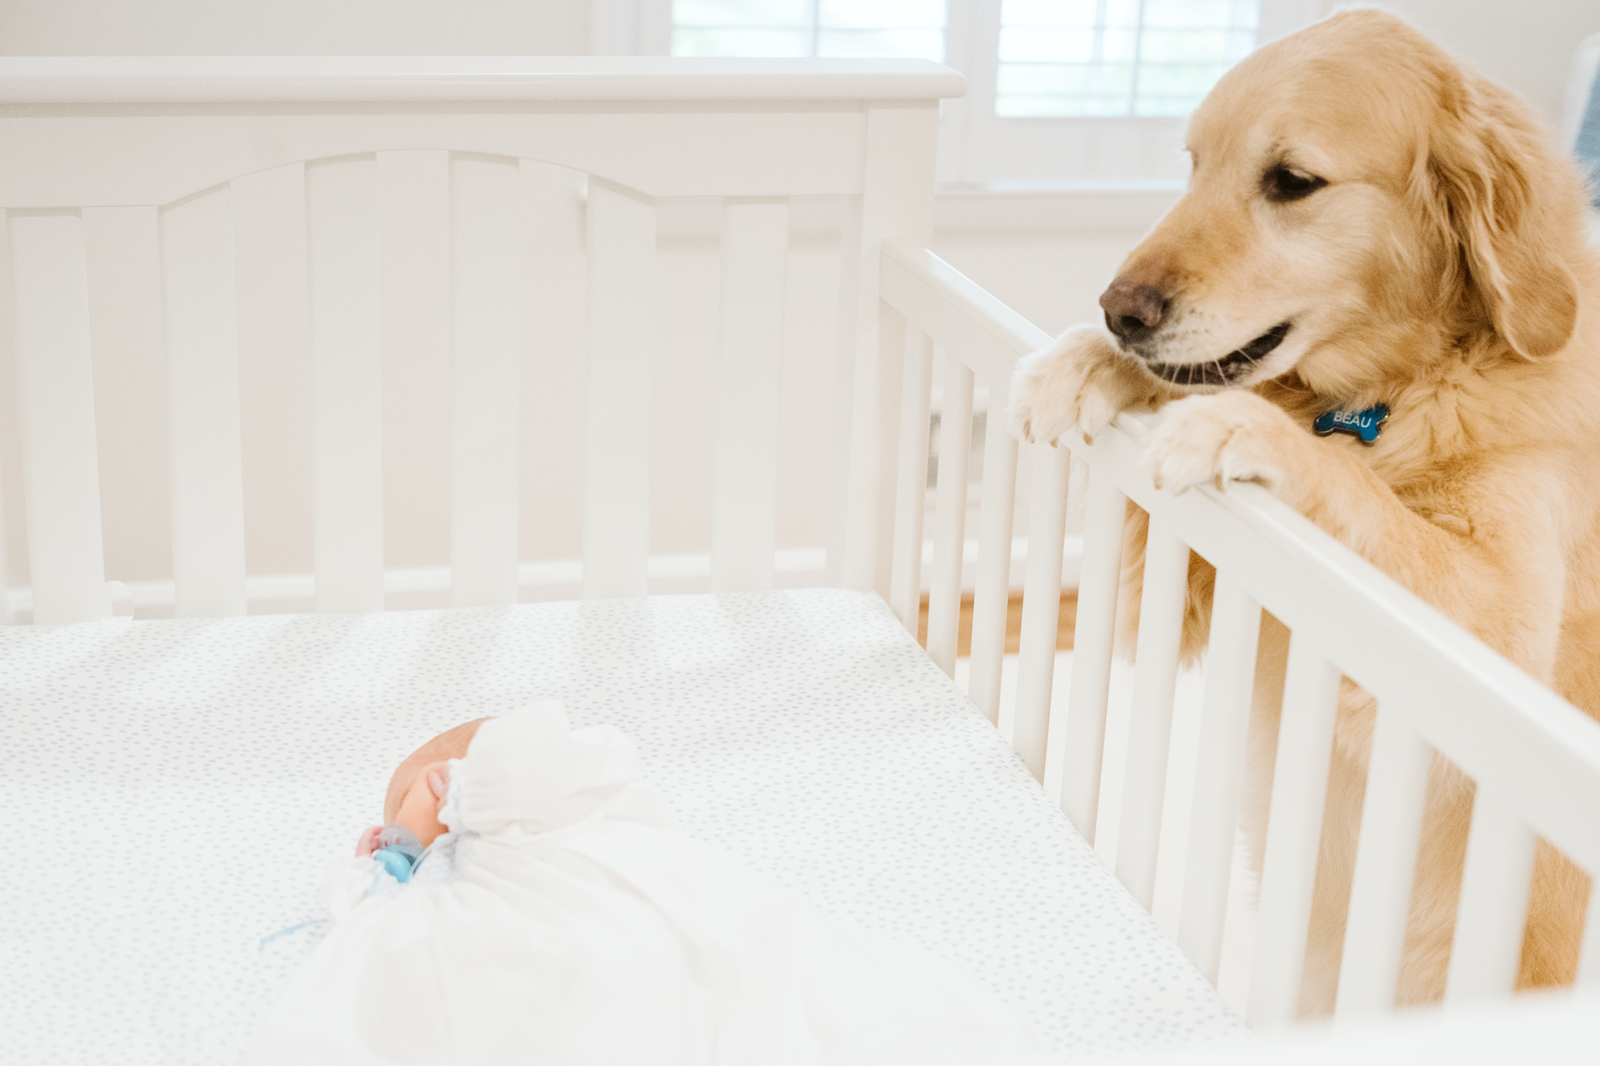 yellow lab peeking over the crib at a little baby